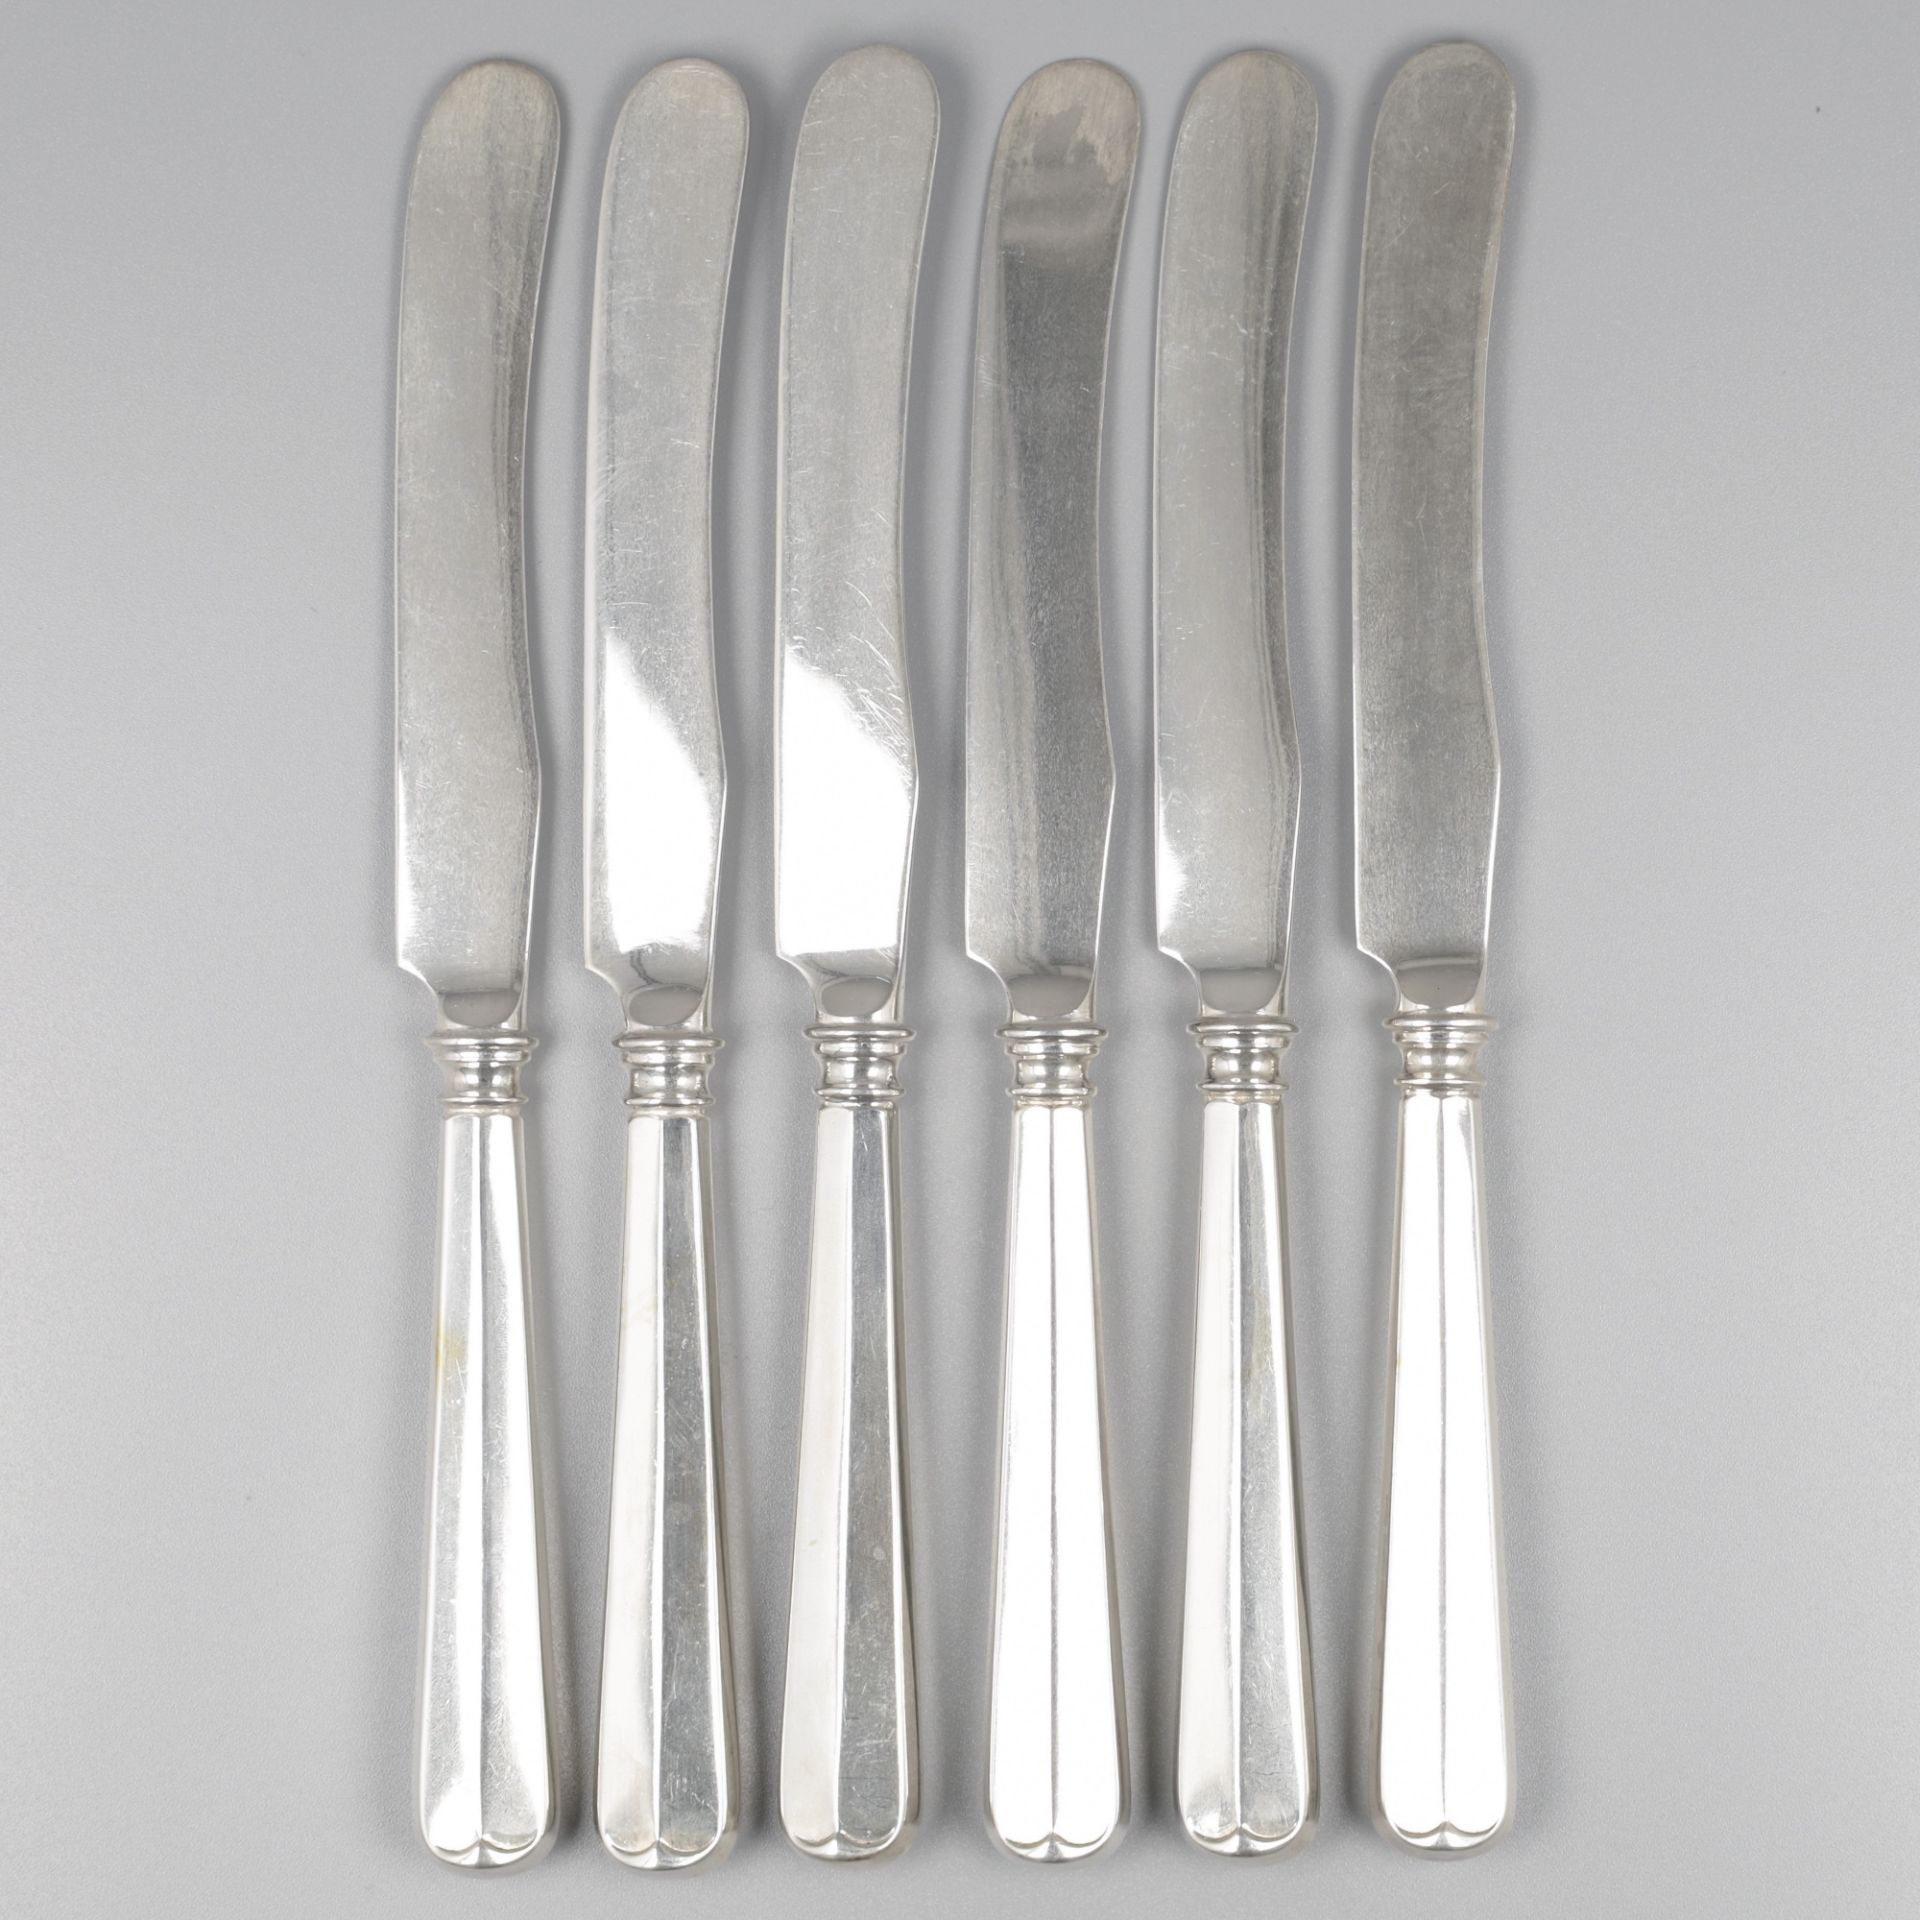 6-piece set of fruit knives "Haags Lofje" silver.